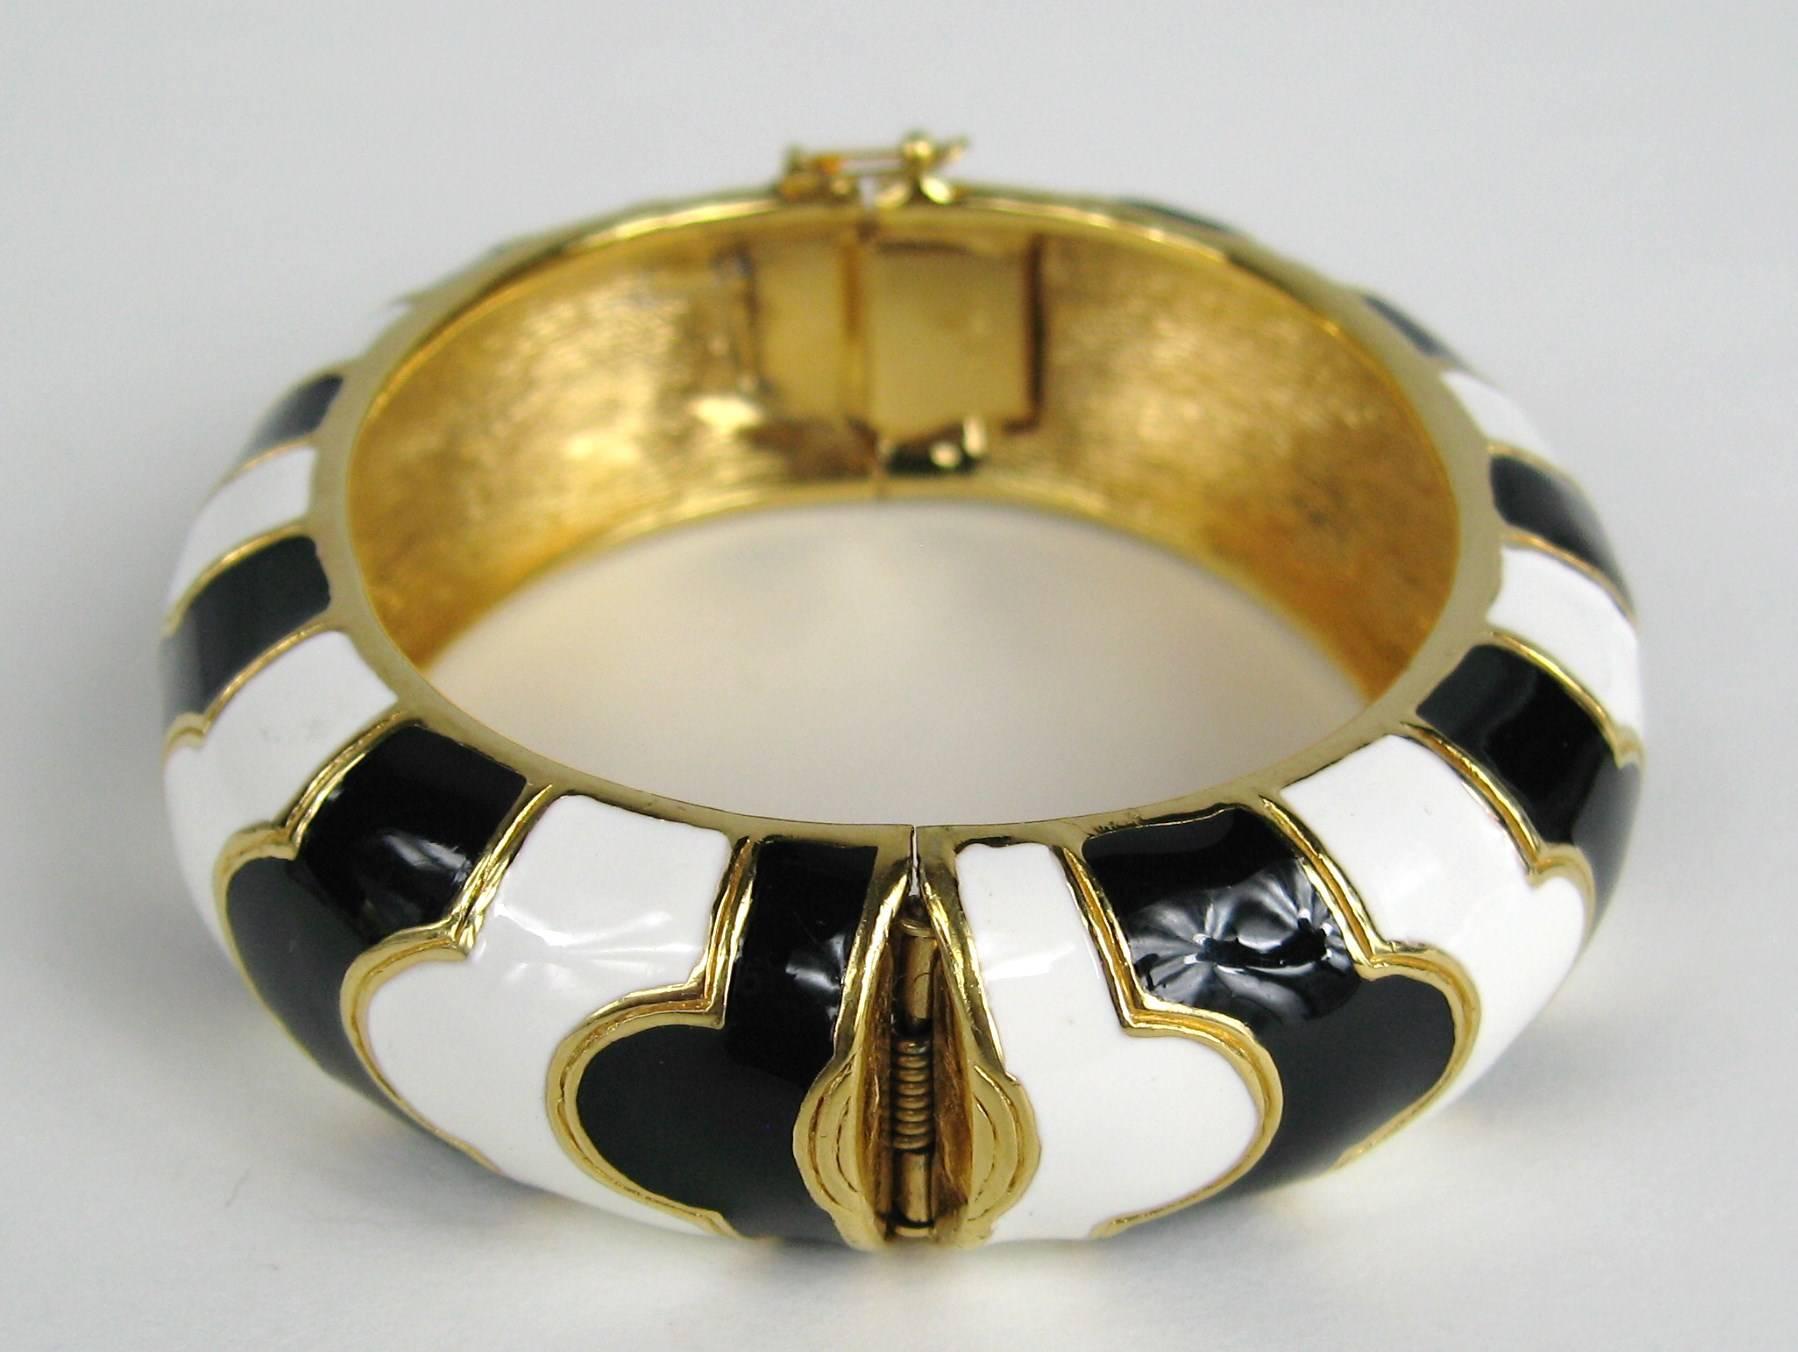 Stunning Ciner bracelet Black and white enamel with gold accents. Hallmarked Ciner. Hinged bangle, Price tag still attached from Neiman Marcus Measuring .75 inches wide. Will fit a size 6-7 in. wrist nicely Matching earrings and necklace available